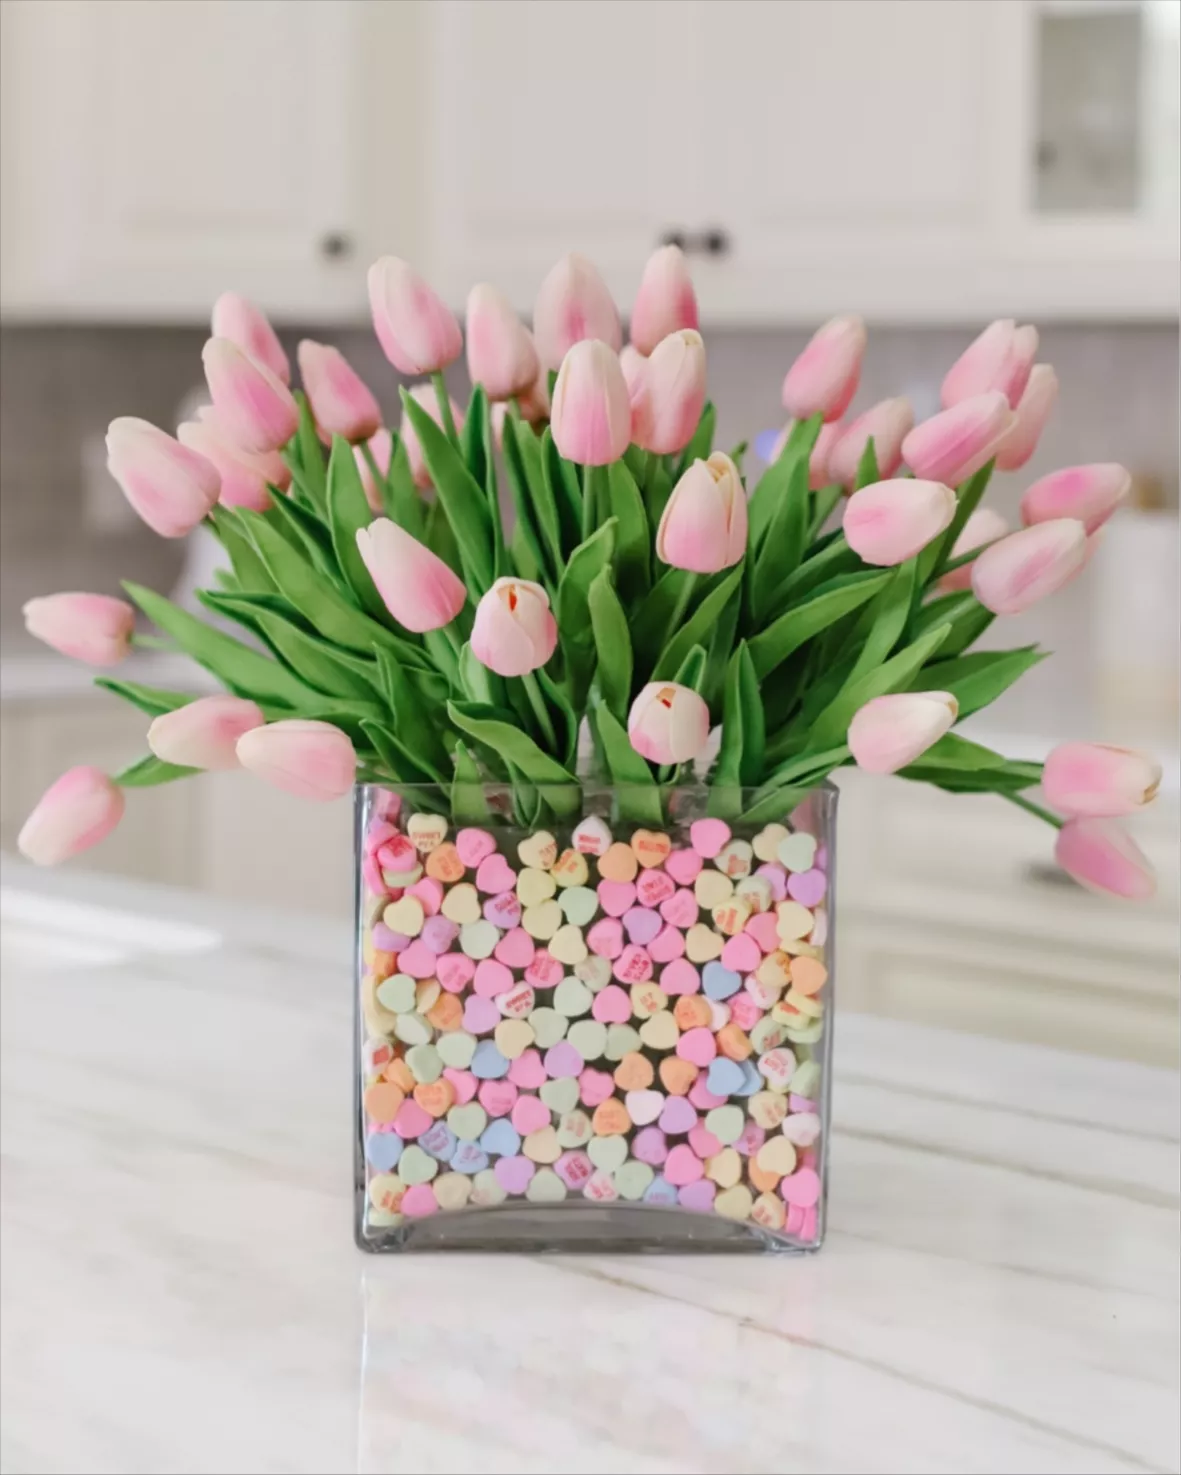 10 Pcs Blue Tulips Artificial Flowers Real Touch Fake Tulips Fake Flowers  for Decoration 13.5 Faux Tulips Faux Flowers Bulk Artificial Tulips  Flowers